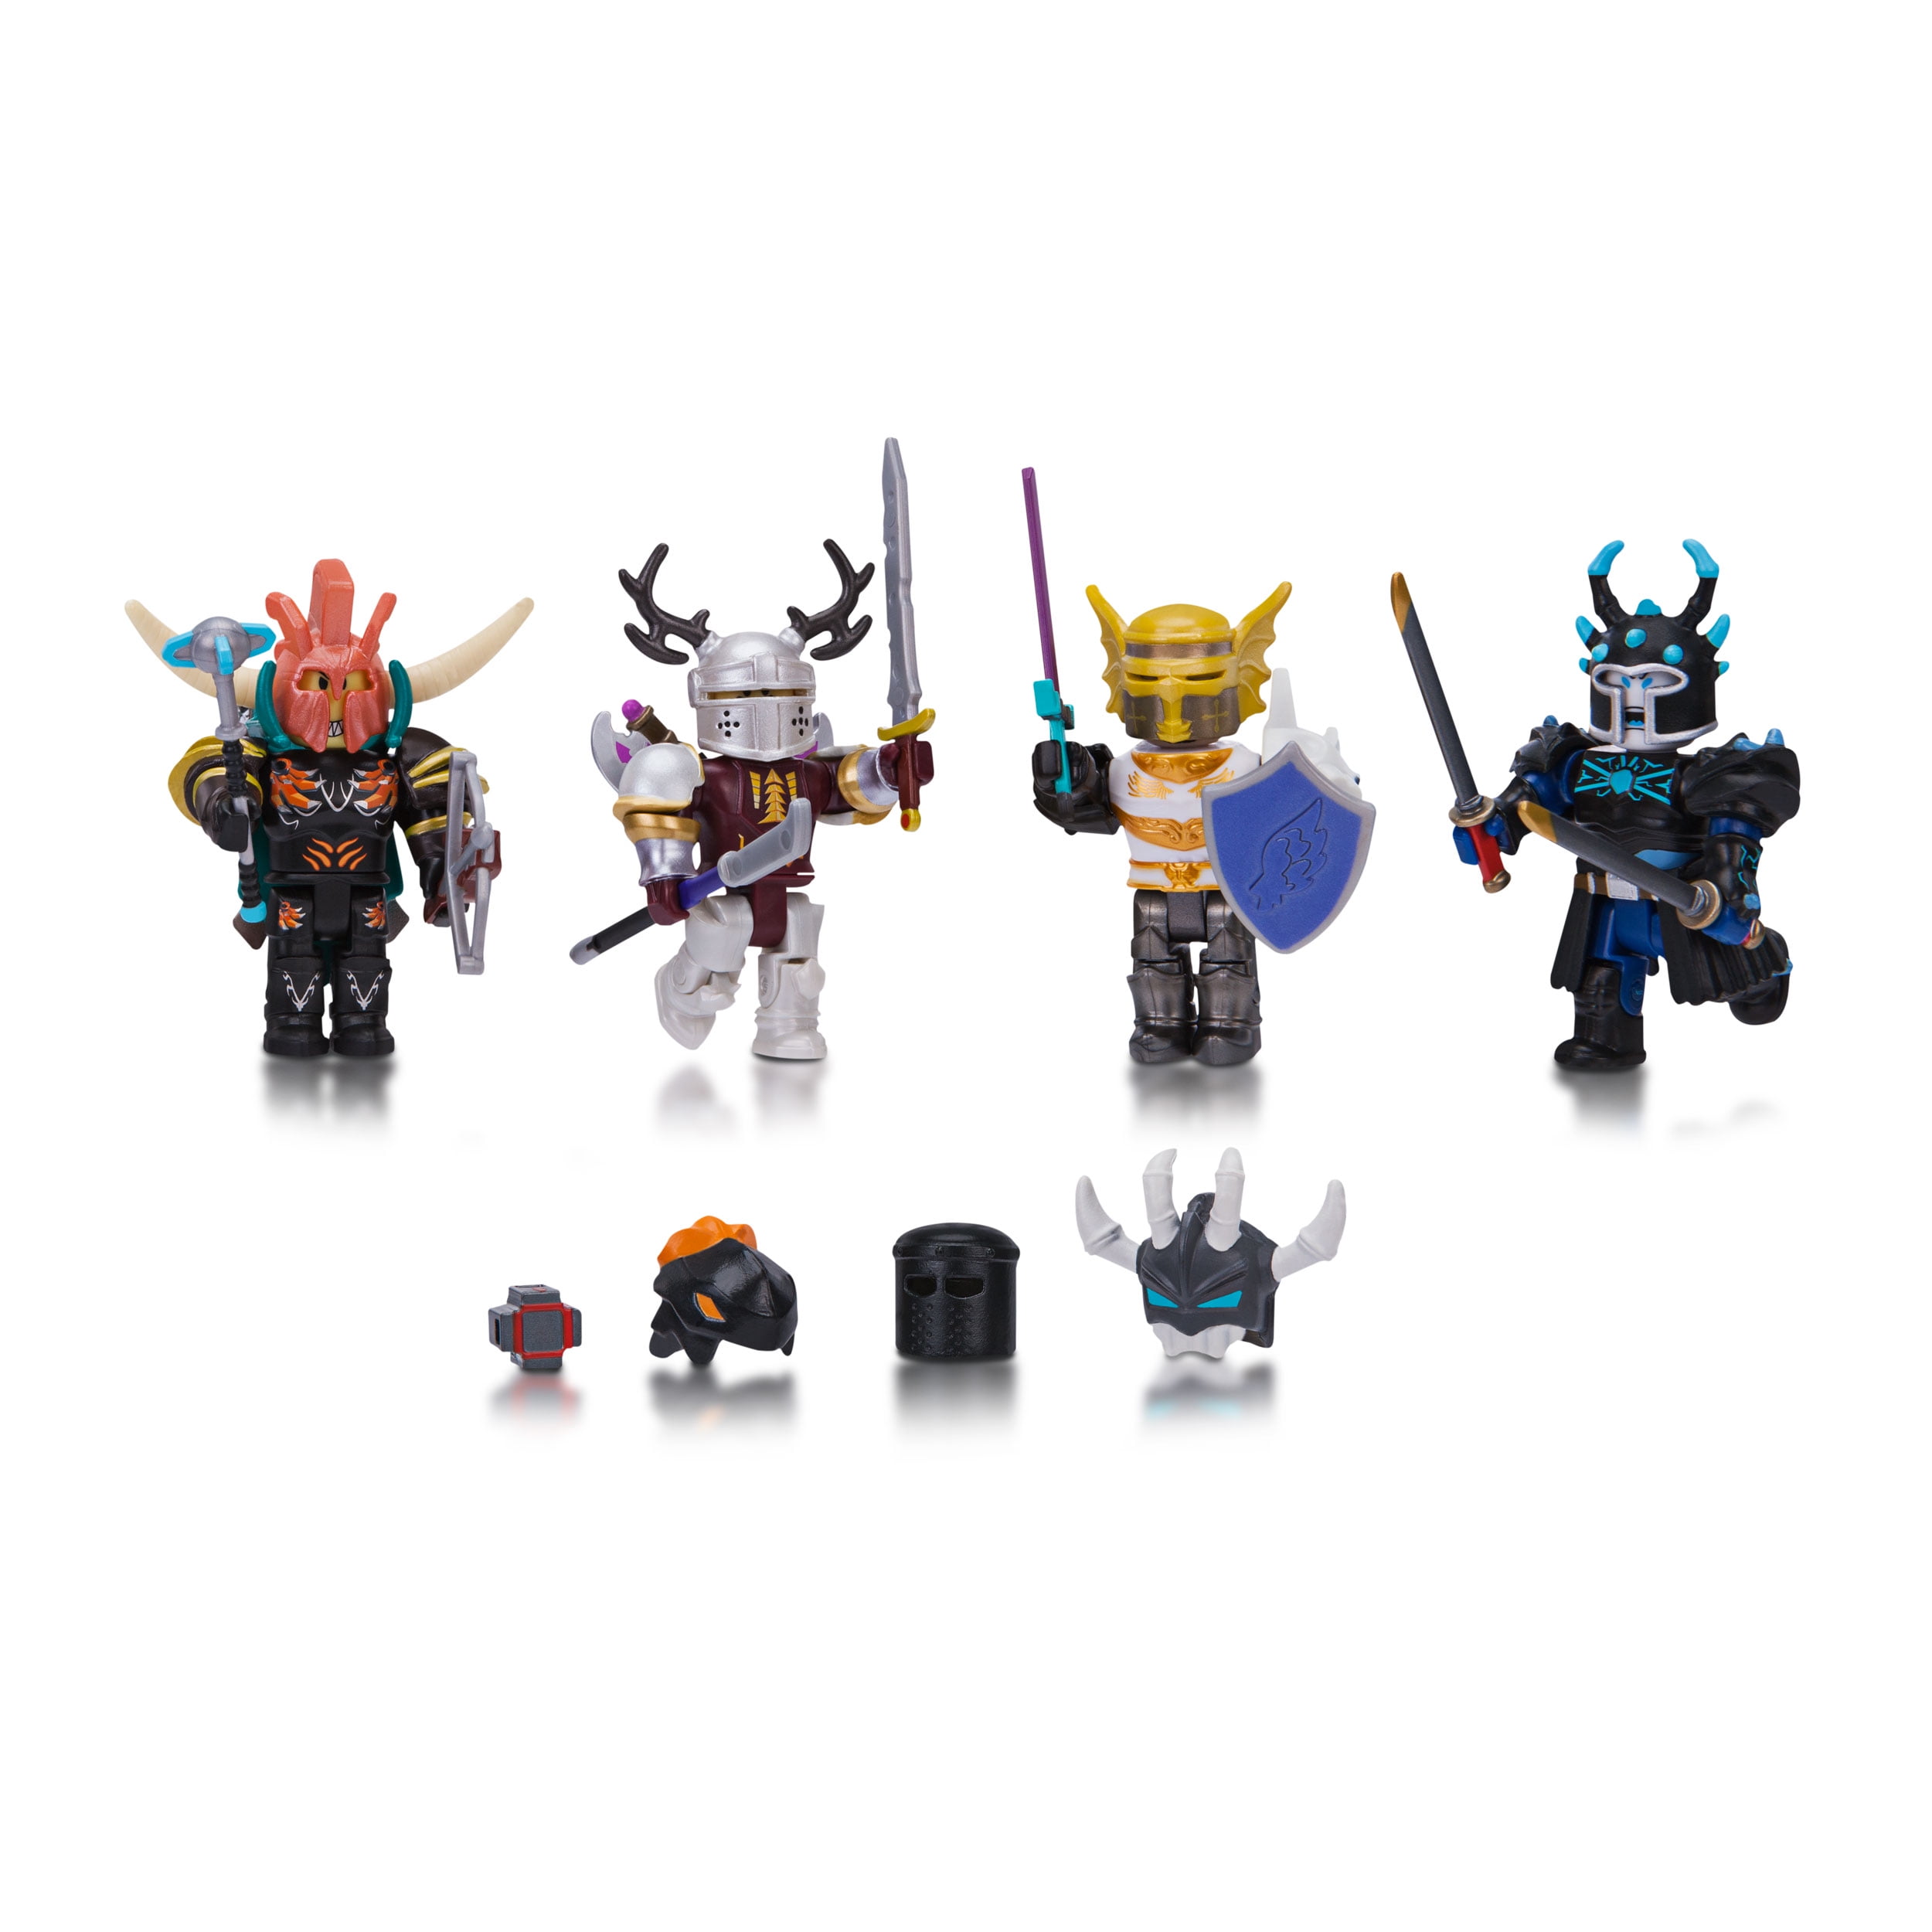 Roblox Legends of Roblox Six Figure Pack for Kids Birthday Christmas Gift Toys 